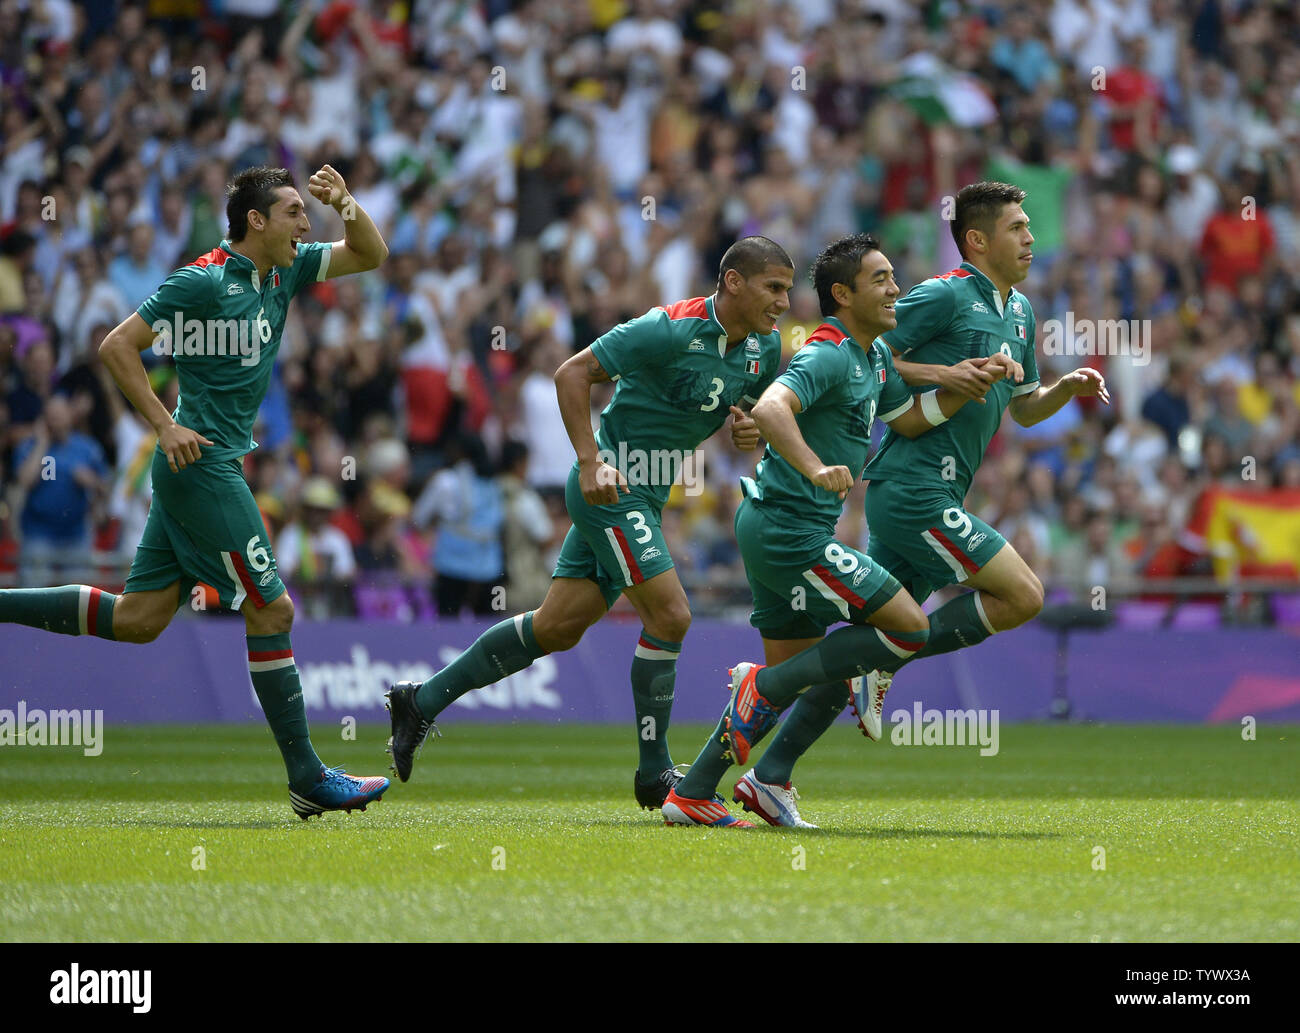 Hector Herrera, Carlos Salcido, Marco Fabian and Oribe Peralta of Mexico celebrate Peralta's goal during the first half of the Gold Medal Football Match against Brazil at the London 2012 Summer Olympics on August 11, 2012 at Wembley Stadium, London.      UPI/Brian Kersey Stock Photo